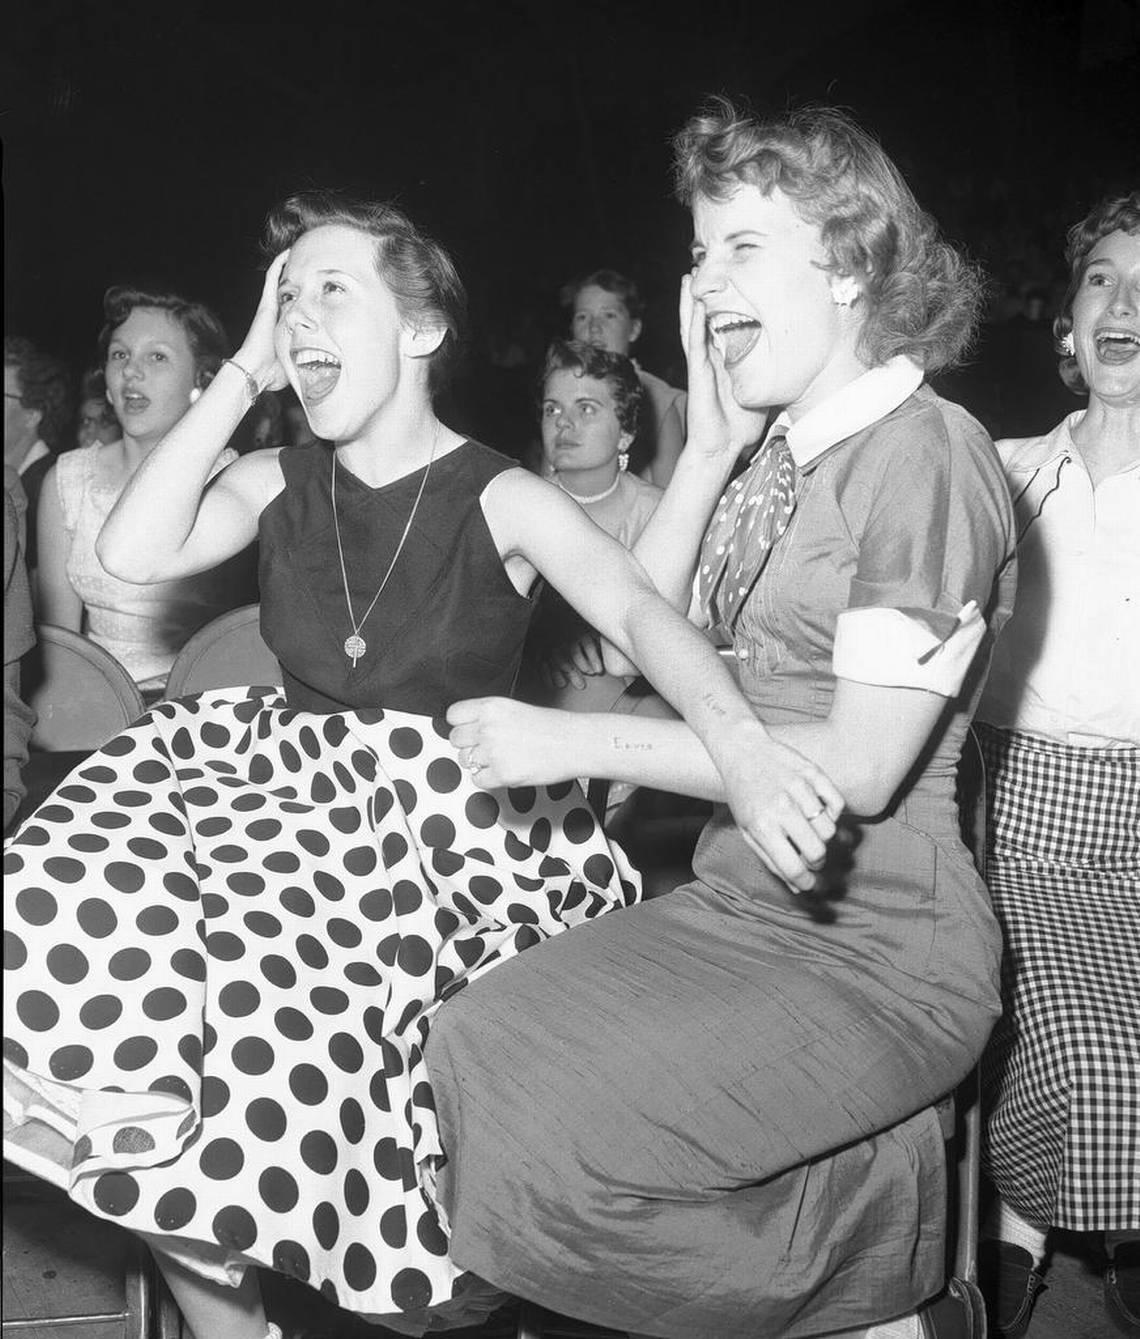 Two Dallas high school girls etched Elvis’ name on their forearms for his concert in Fort Worth in April 1956.